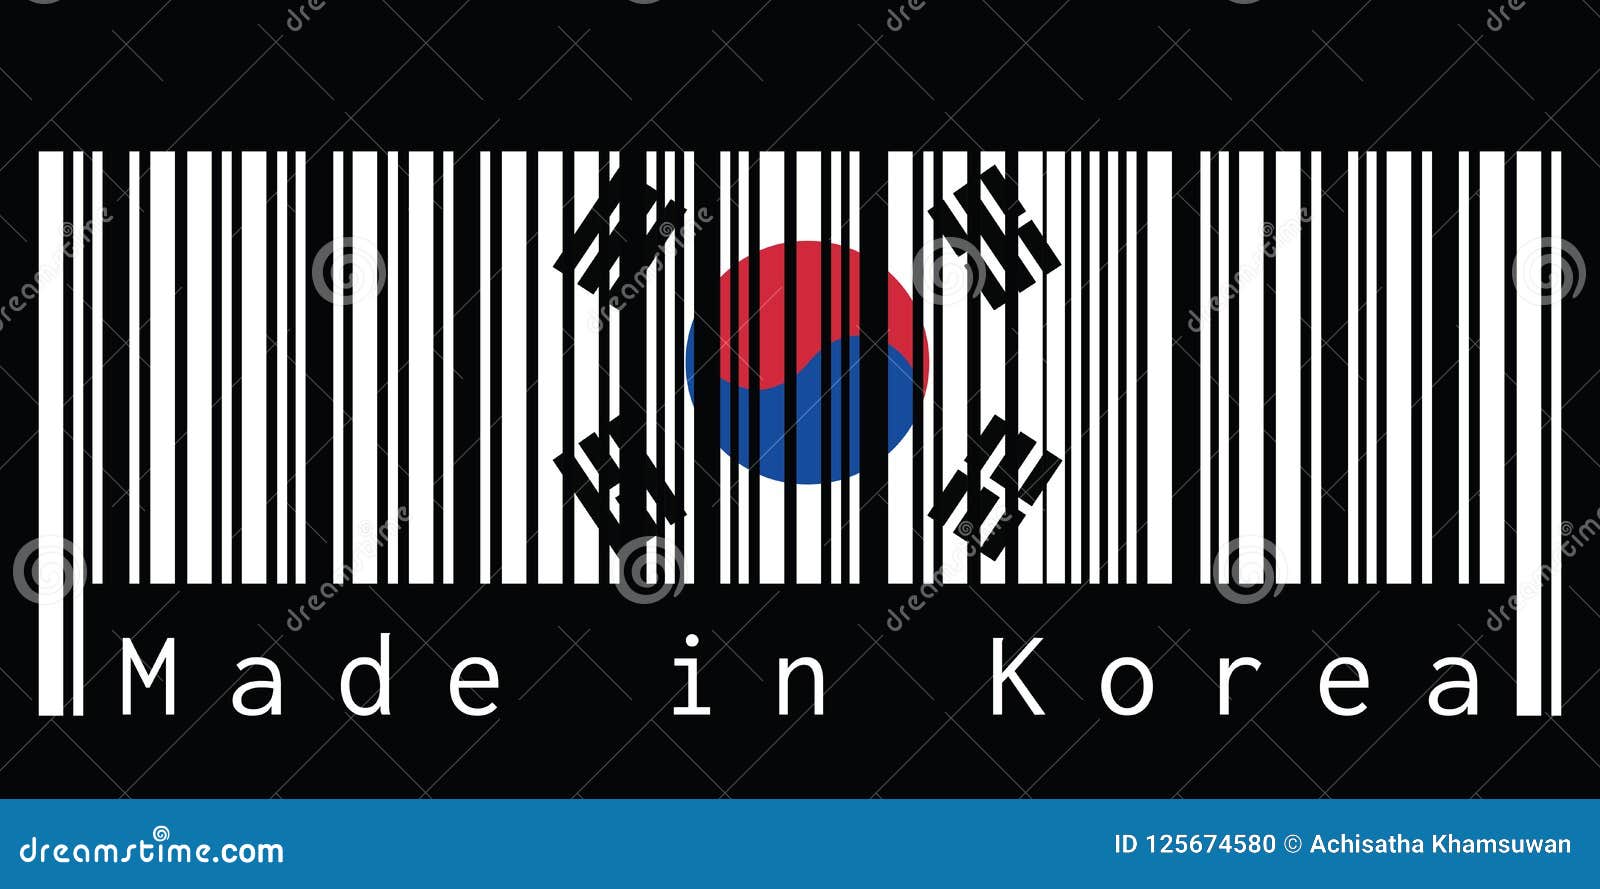 barcode set the color of south korea flag, the white color with taegeuk and black trigrams on black background.